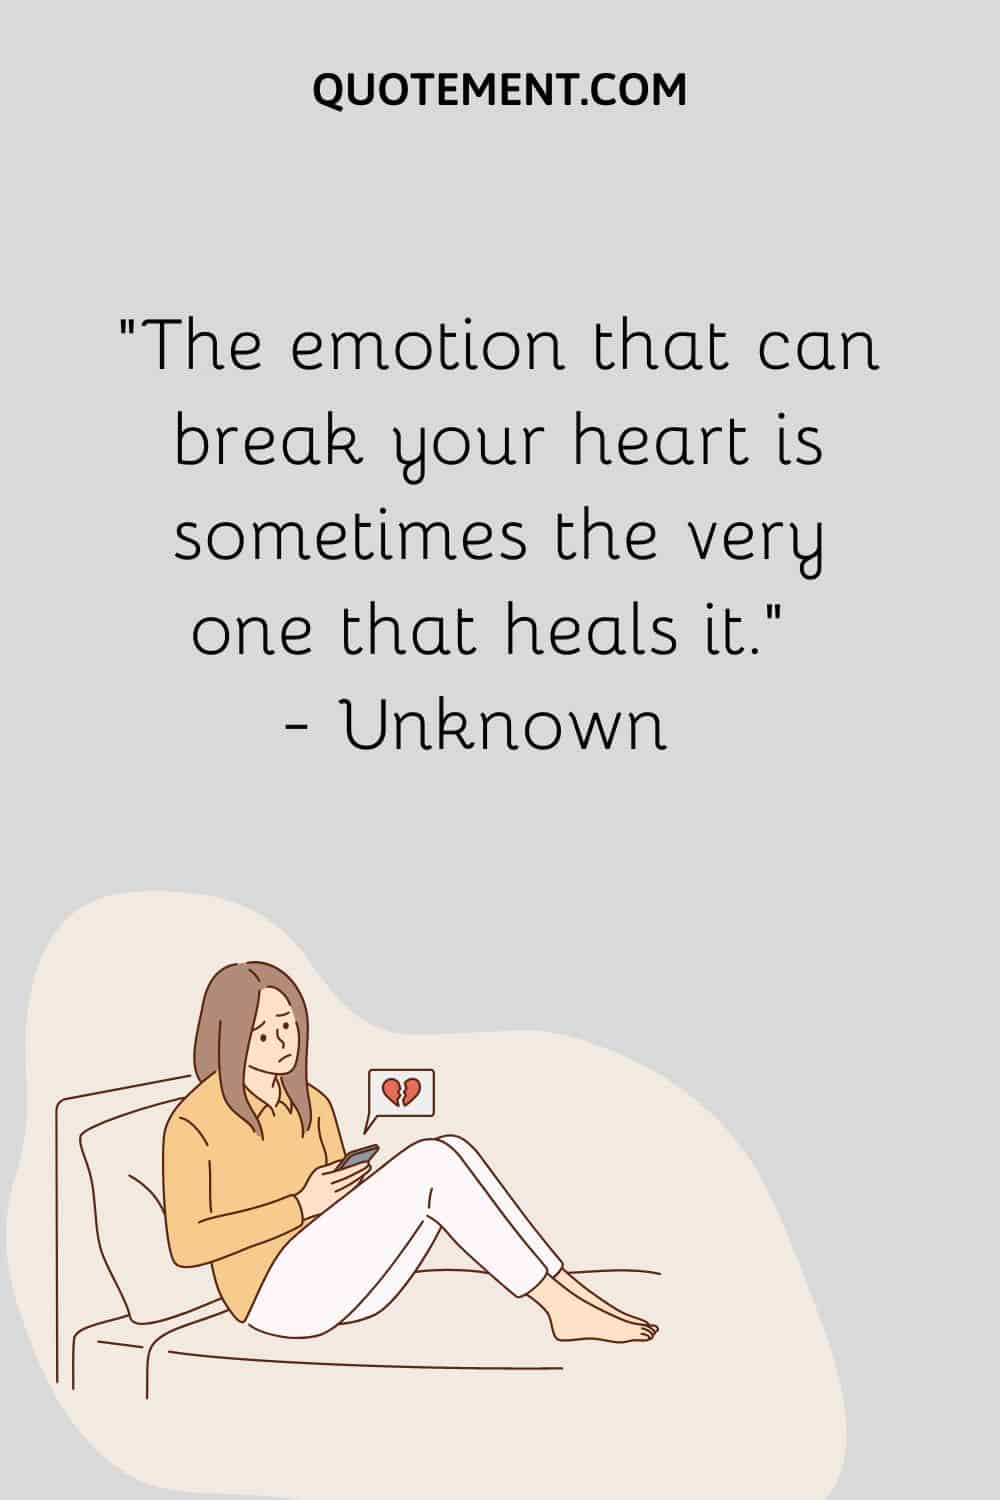 The emotion that can break your heart is sometimes the very one that heals it